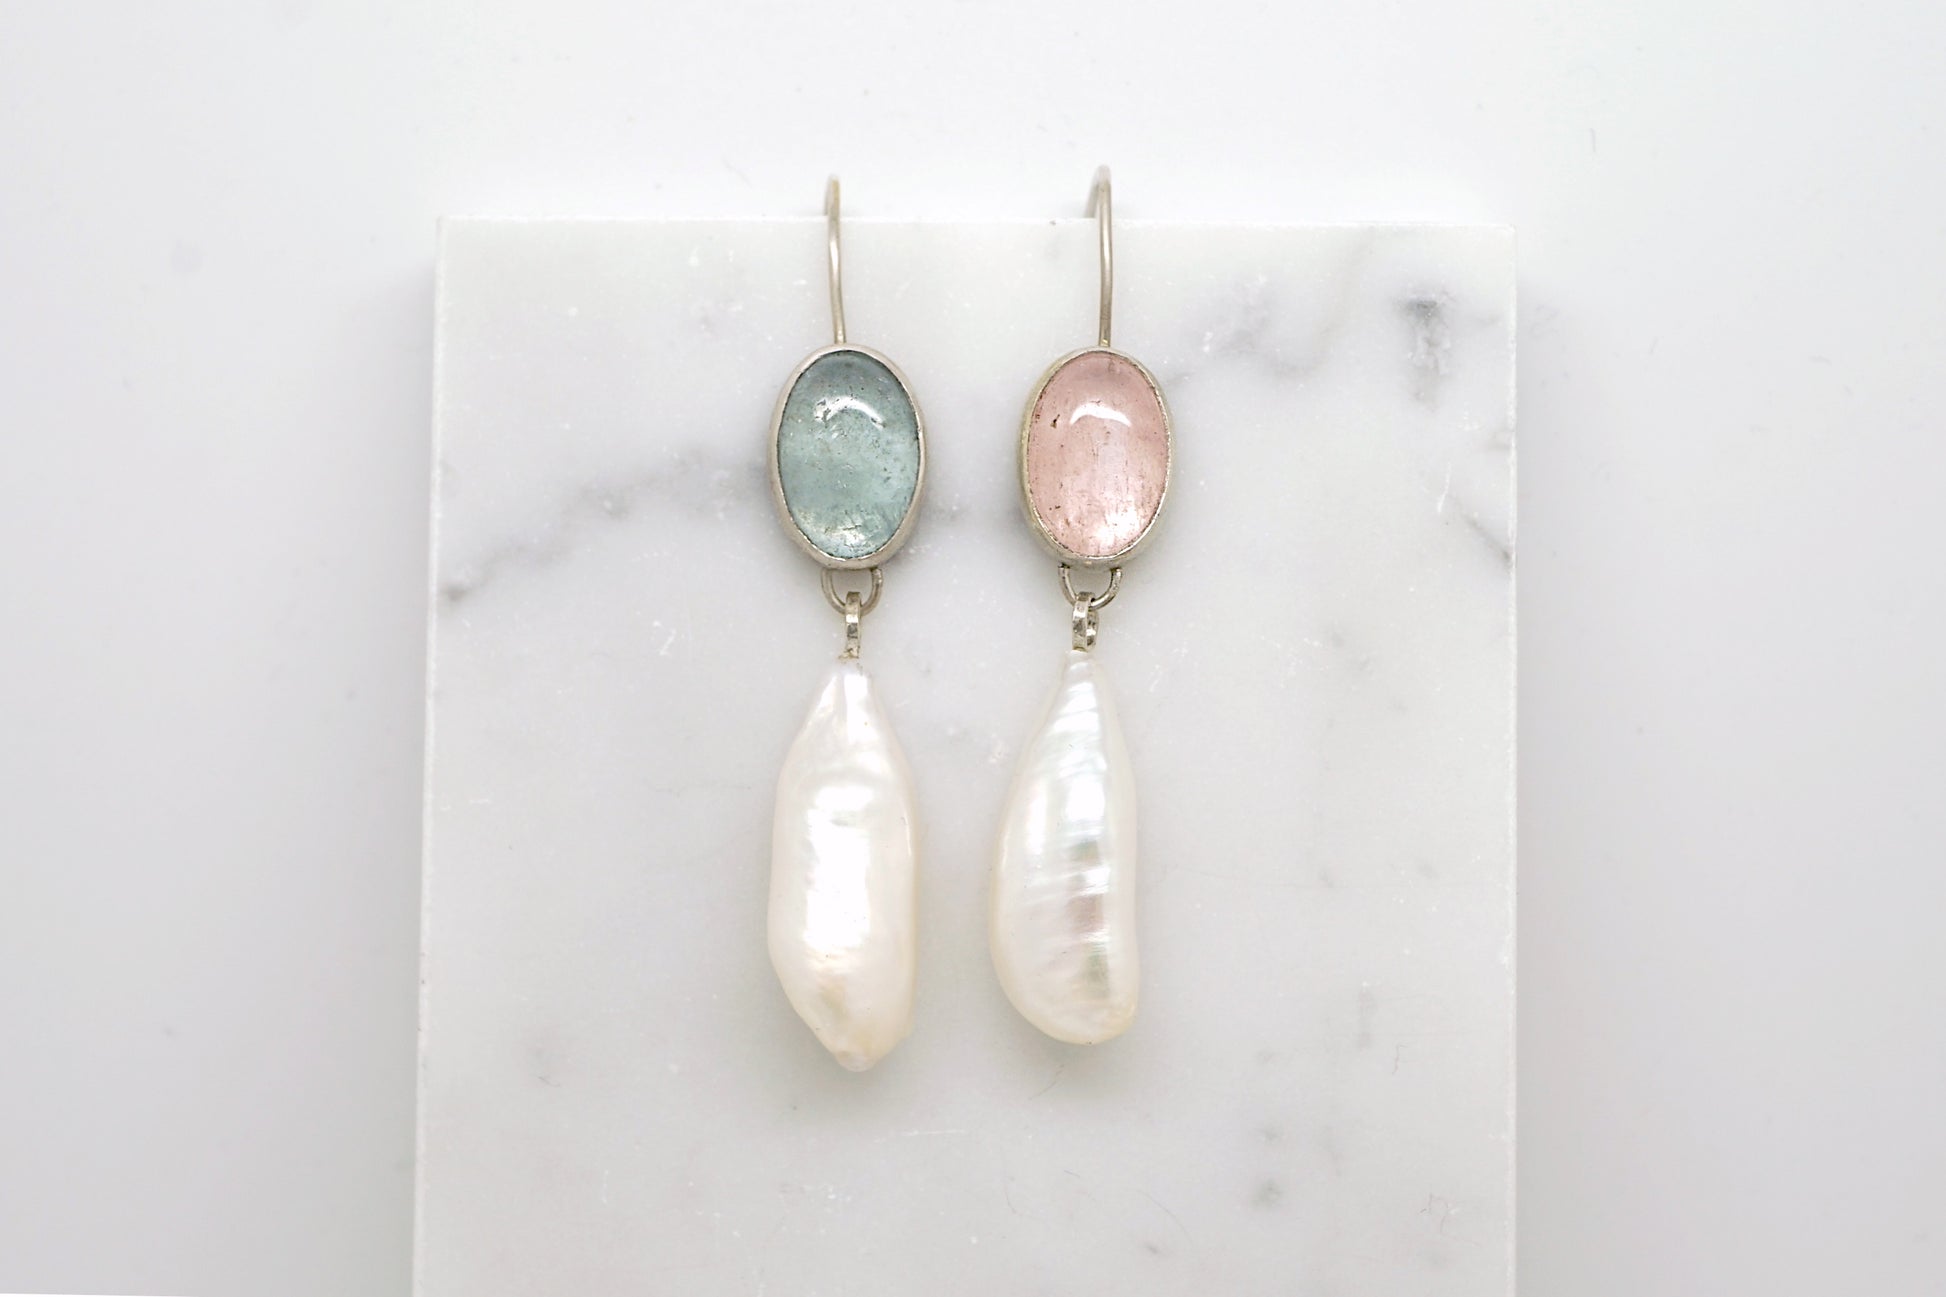 Mix + match aquamarine earrings with baroque pearls